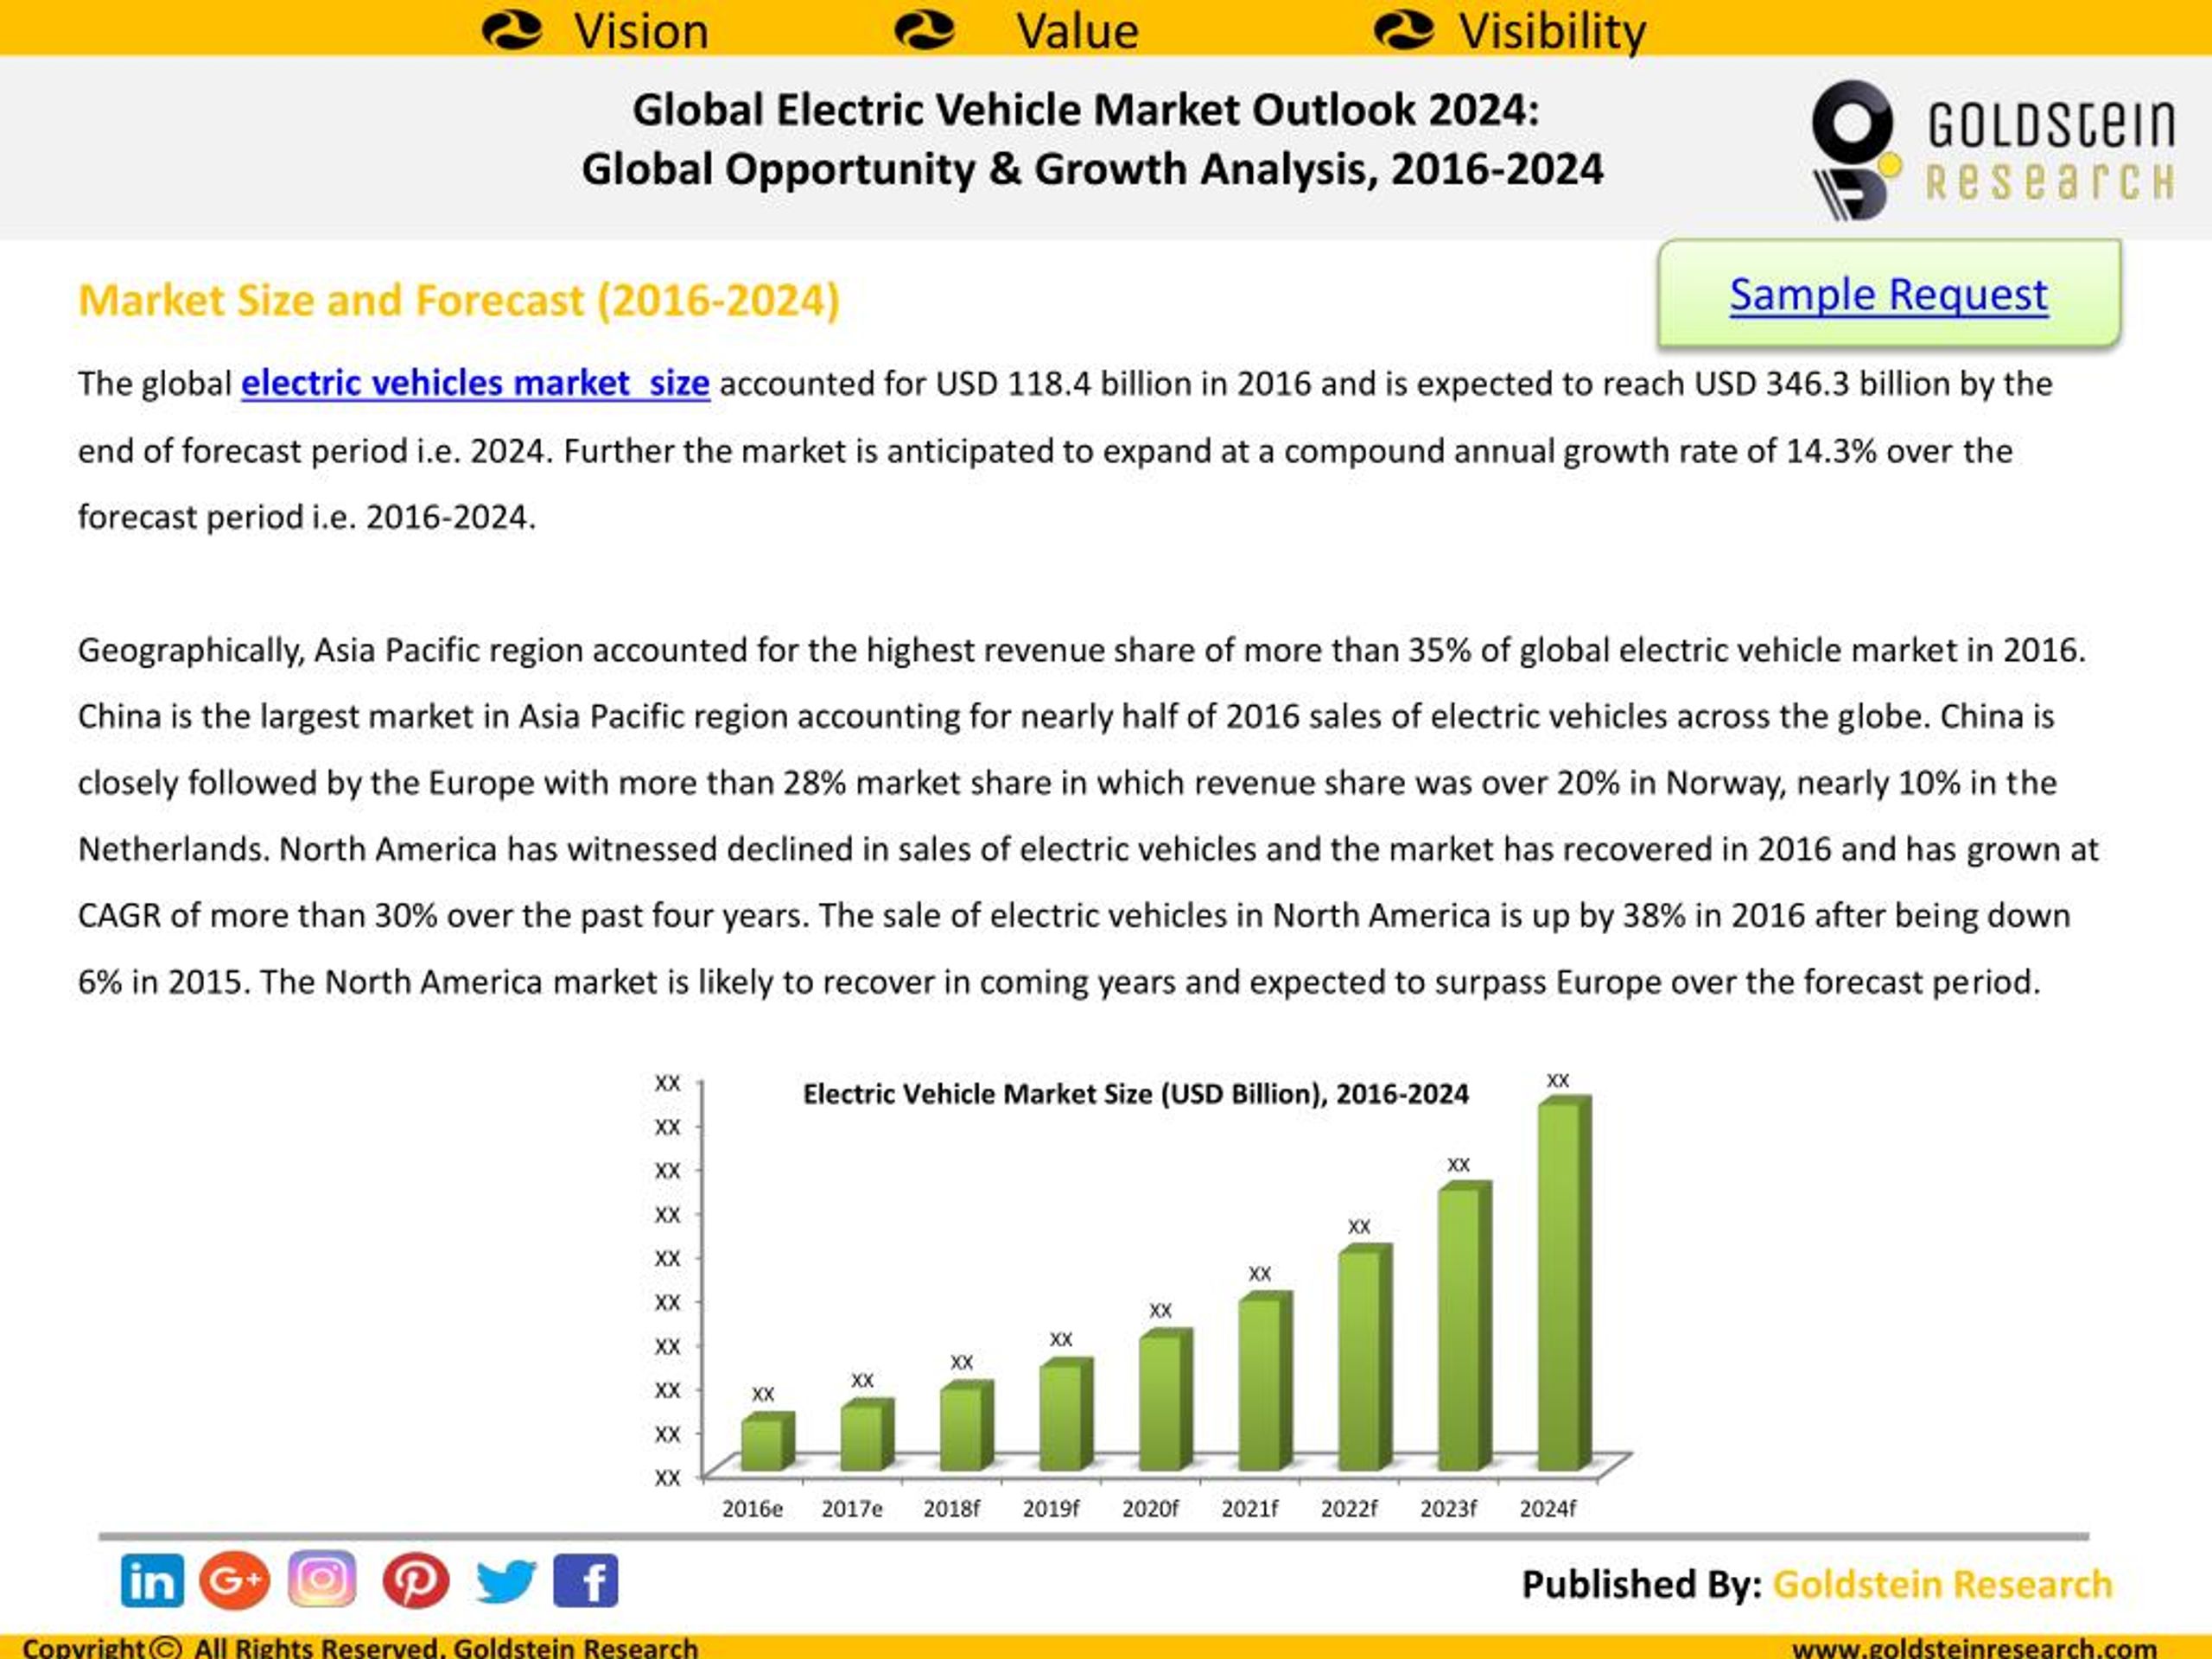 PPT Global Electric Vehicle Market Outlook 2024 Global Opportunity